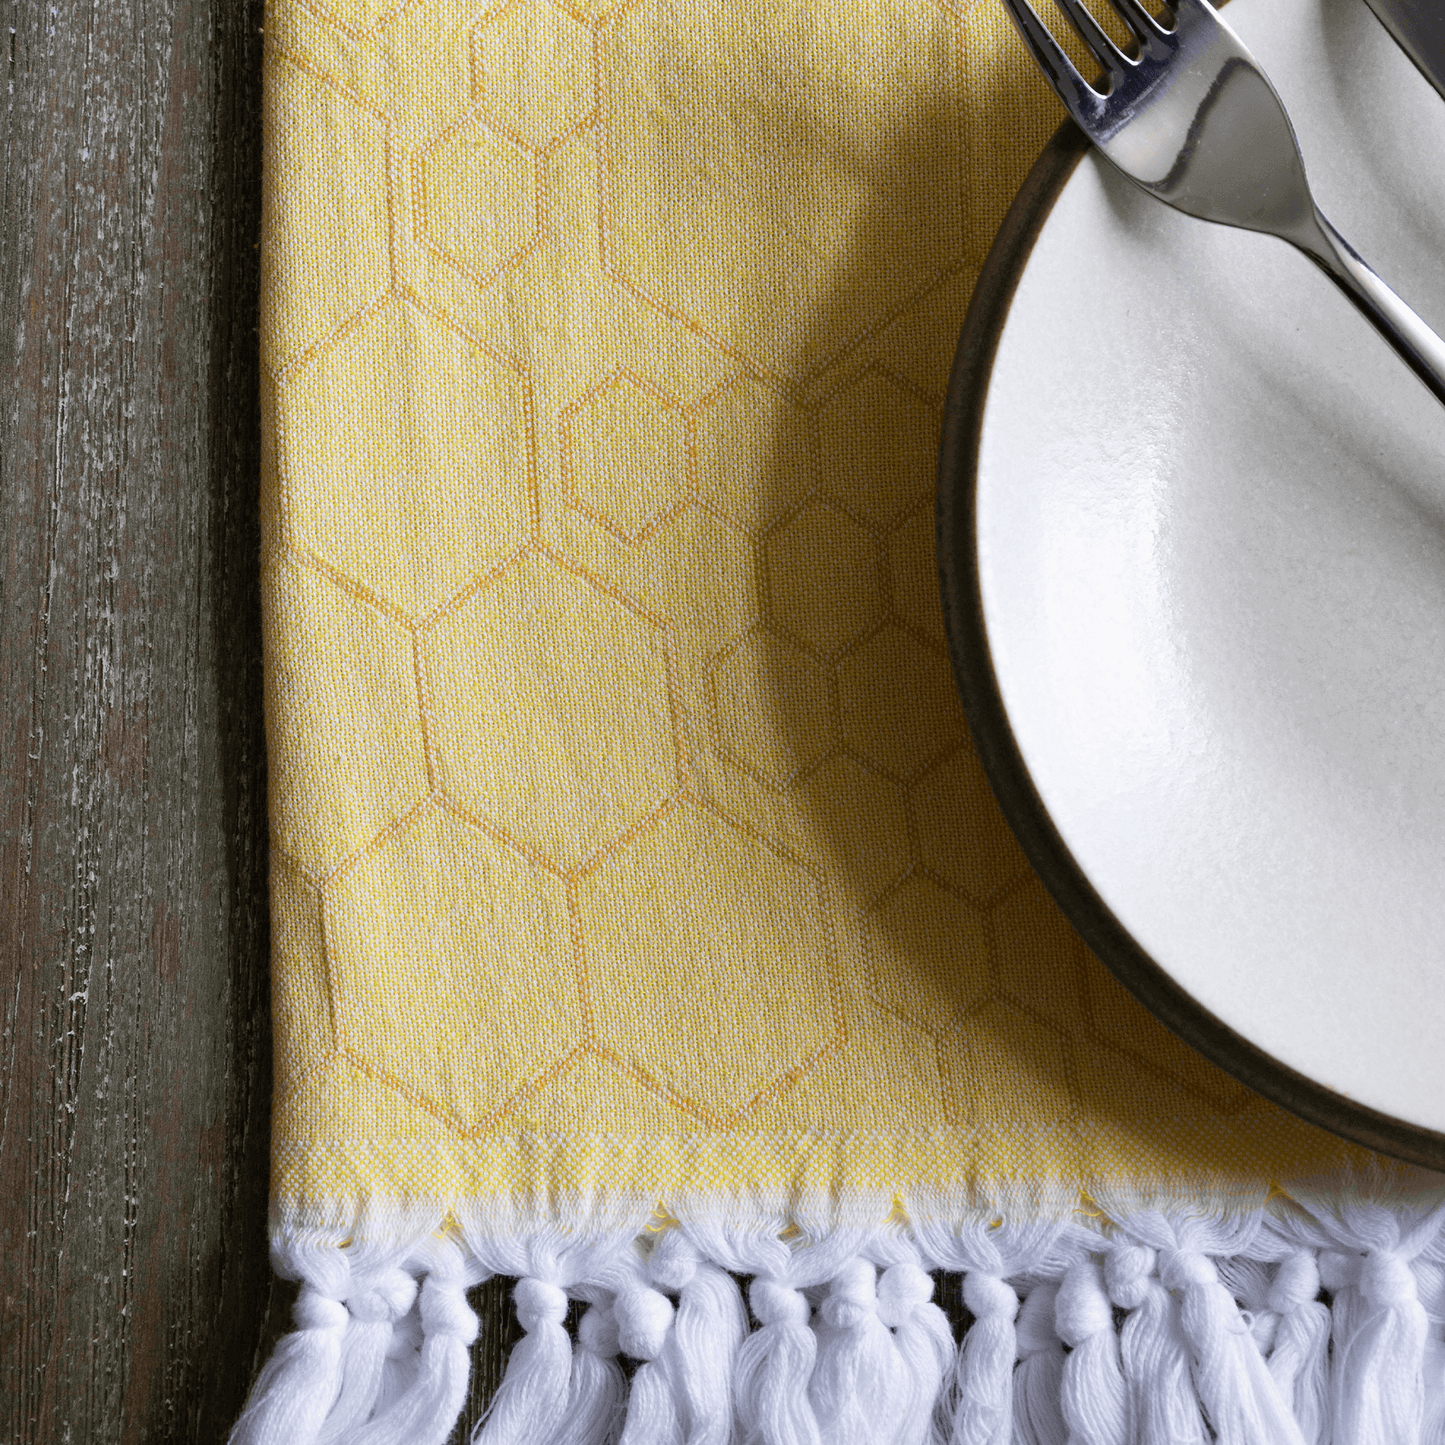  Yellow Turkish hand towel as a hand towel for dinner